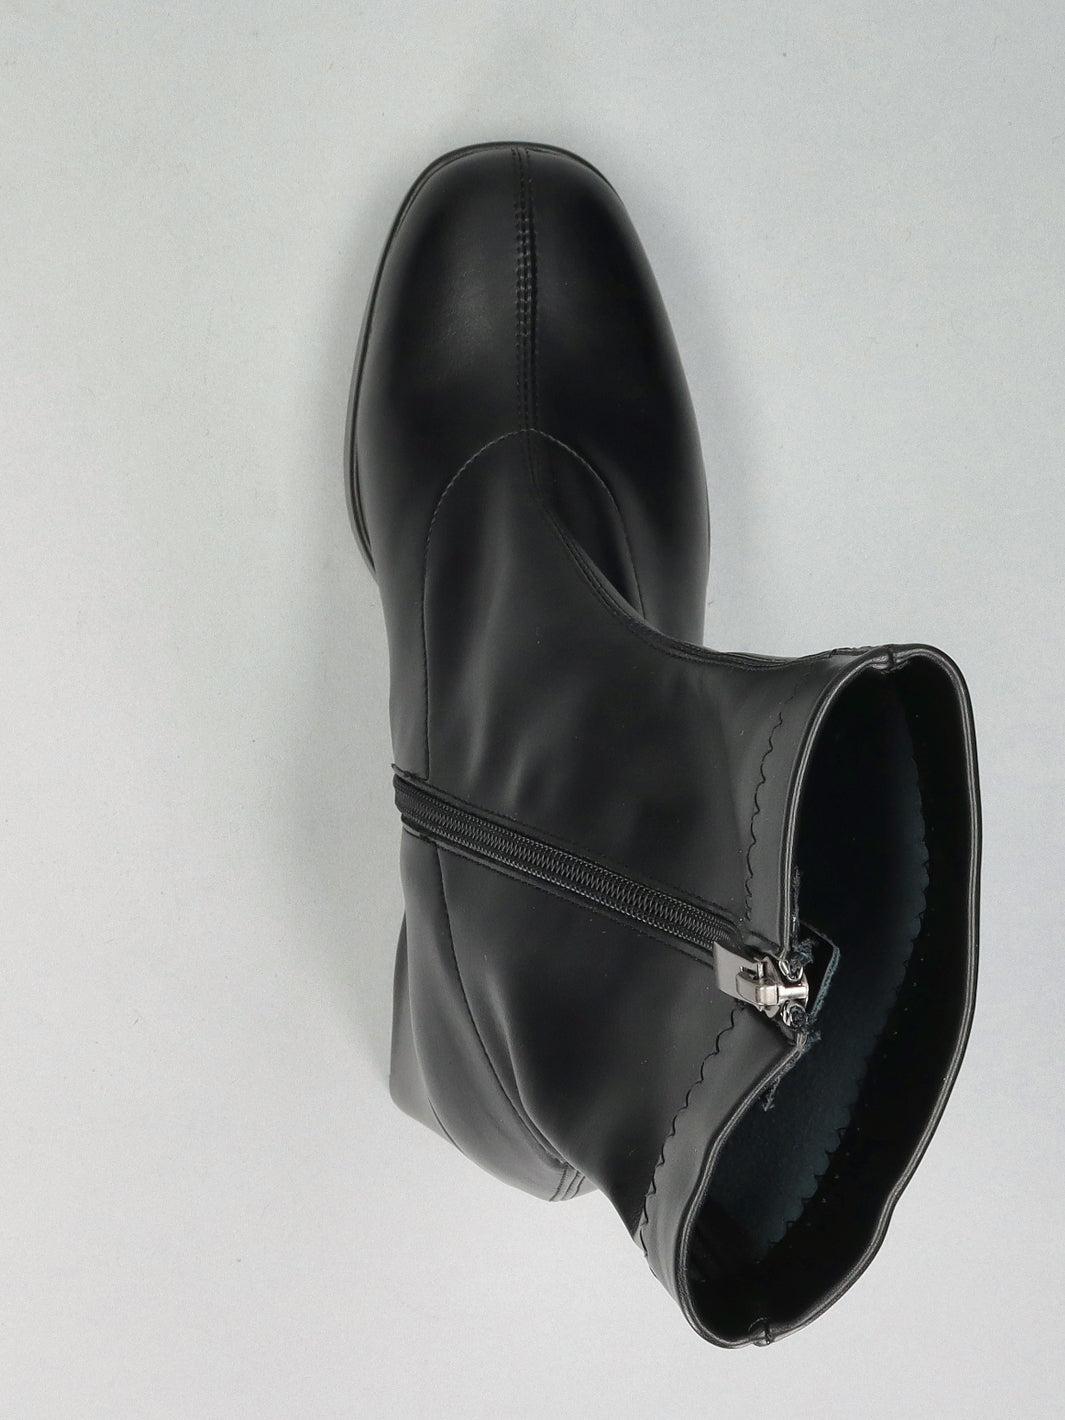 LEATHER BOOTS - BLACK